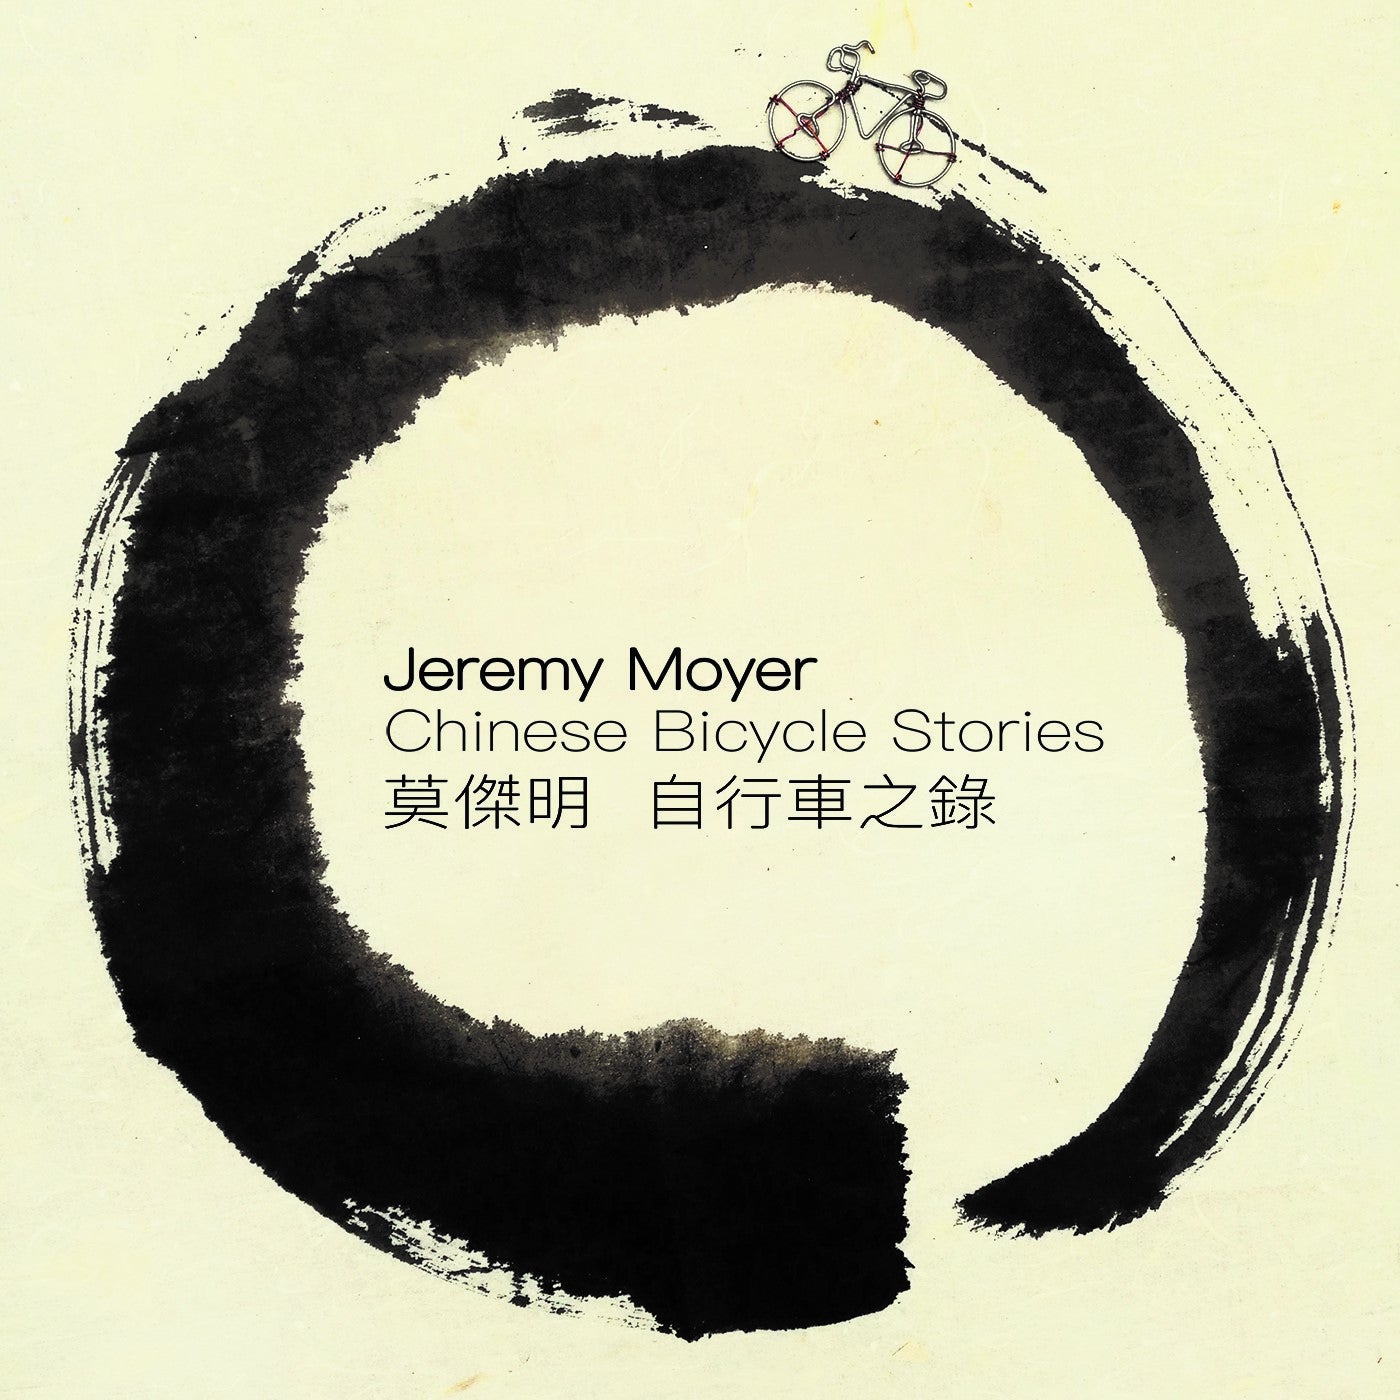 "Chinese Bicycle Stories" album cover